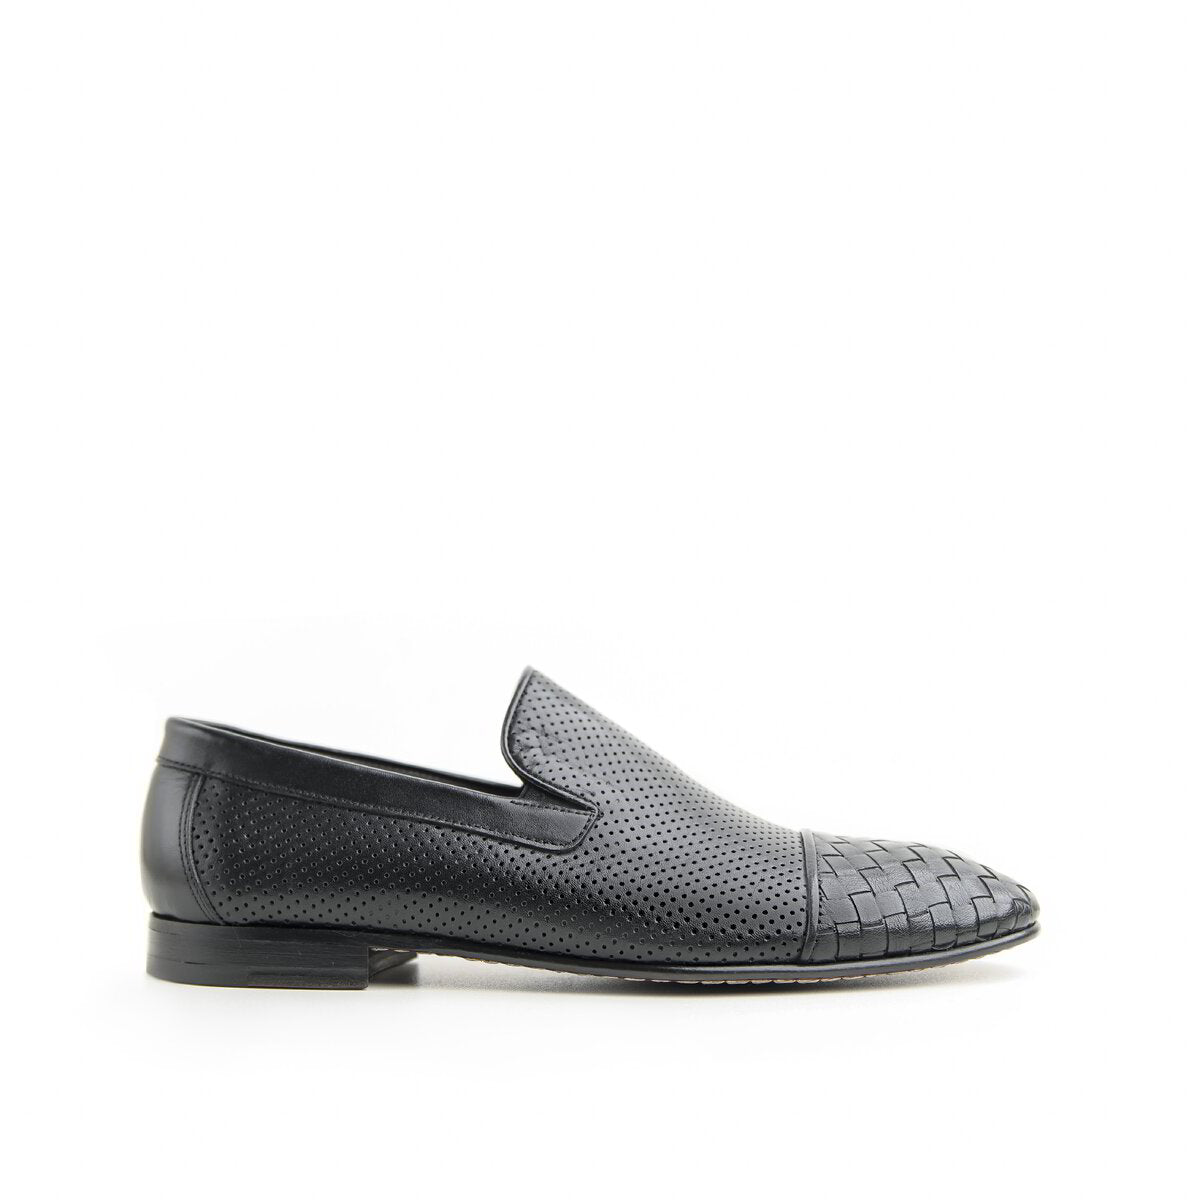 Massima-black-loafers-by-Juyi-Calton